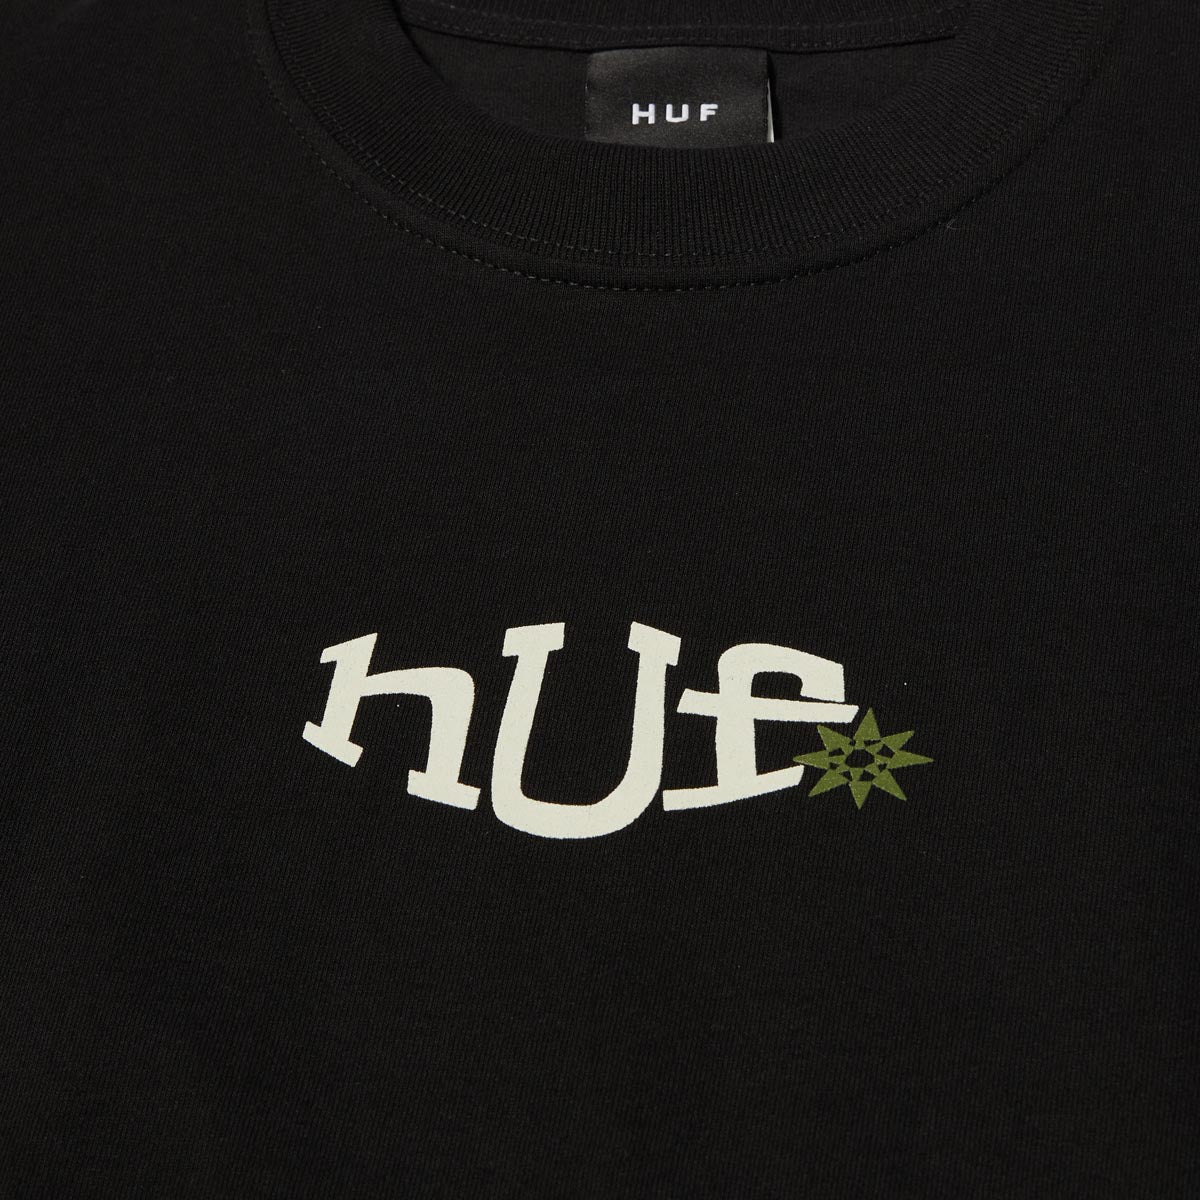 HUF Jazzy Grooves T-Shirt - Black image 3